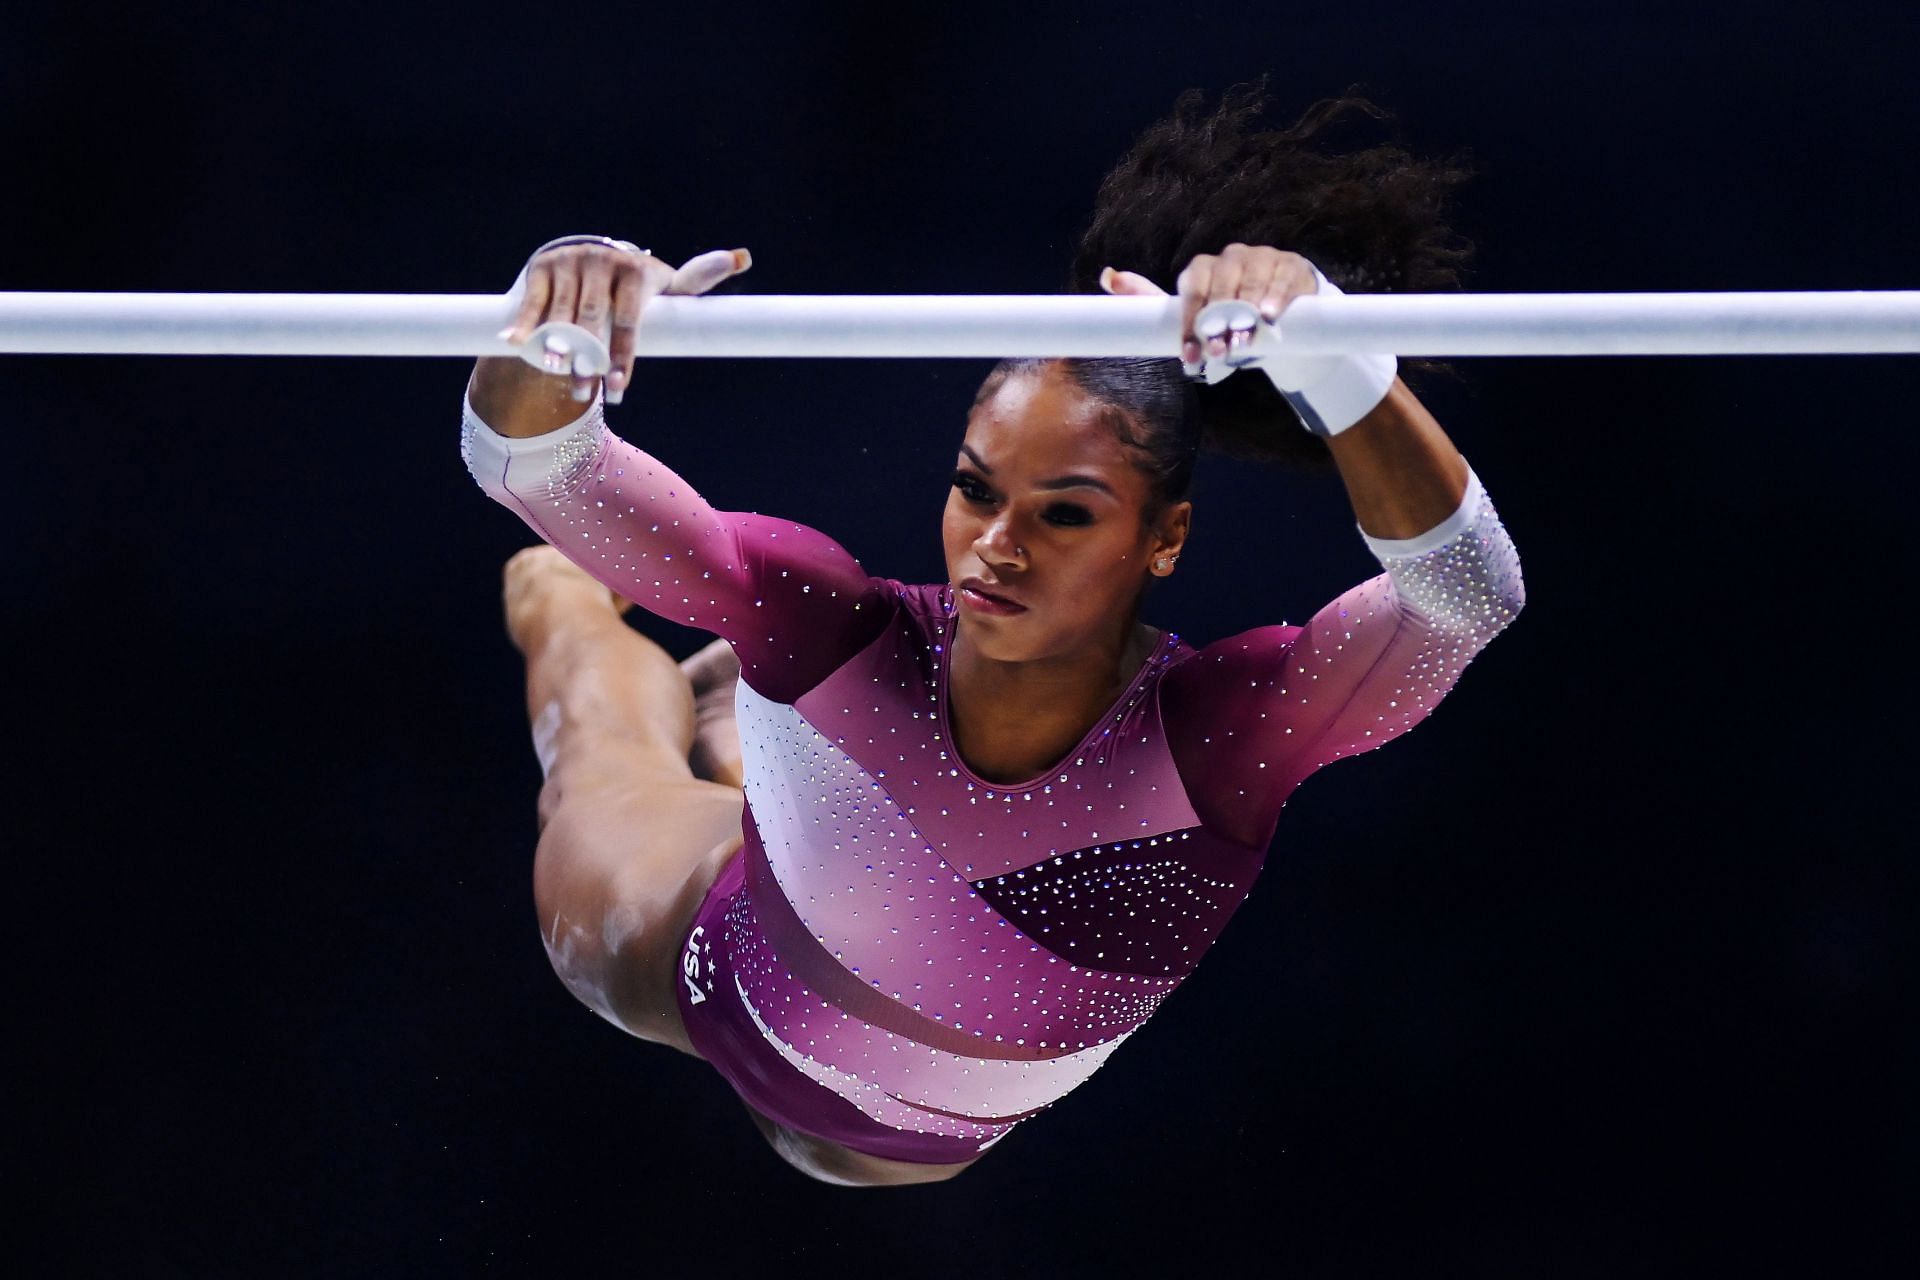 Jones performs for USA at the 2022 Gymnastics World Championships (Photo by Laurence Griffiths/Getty Images)